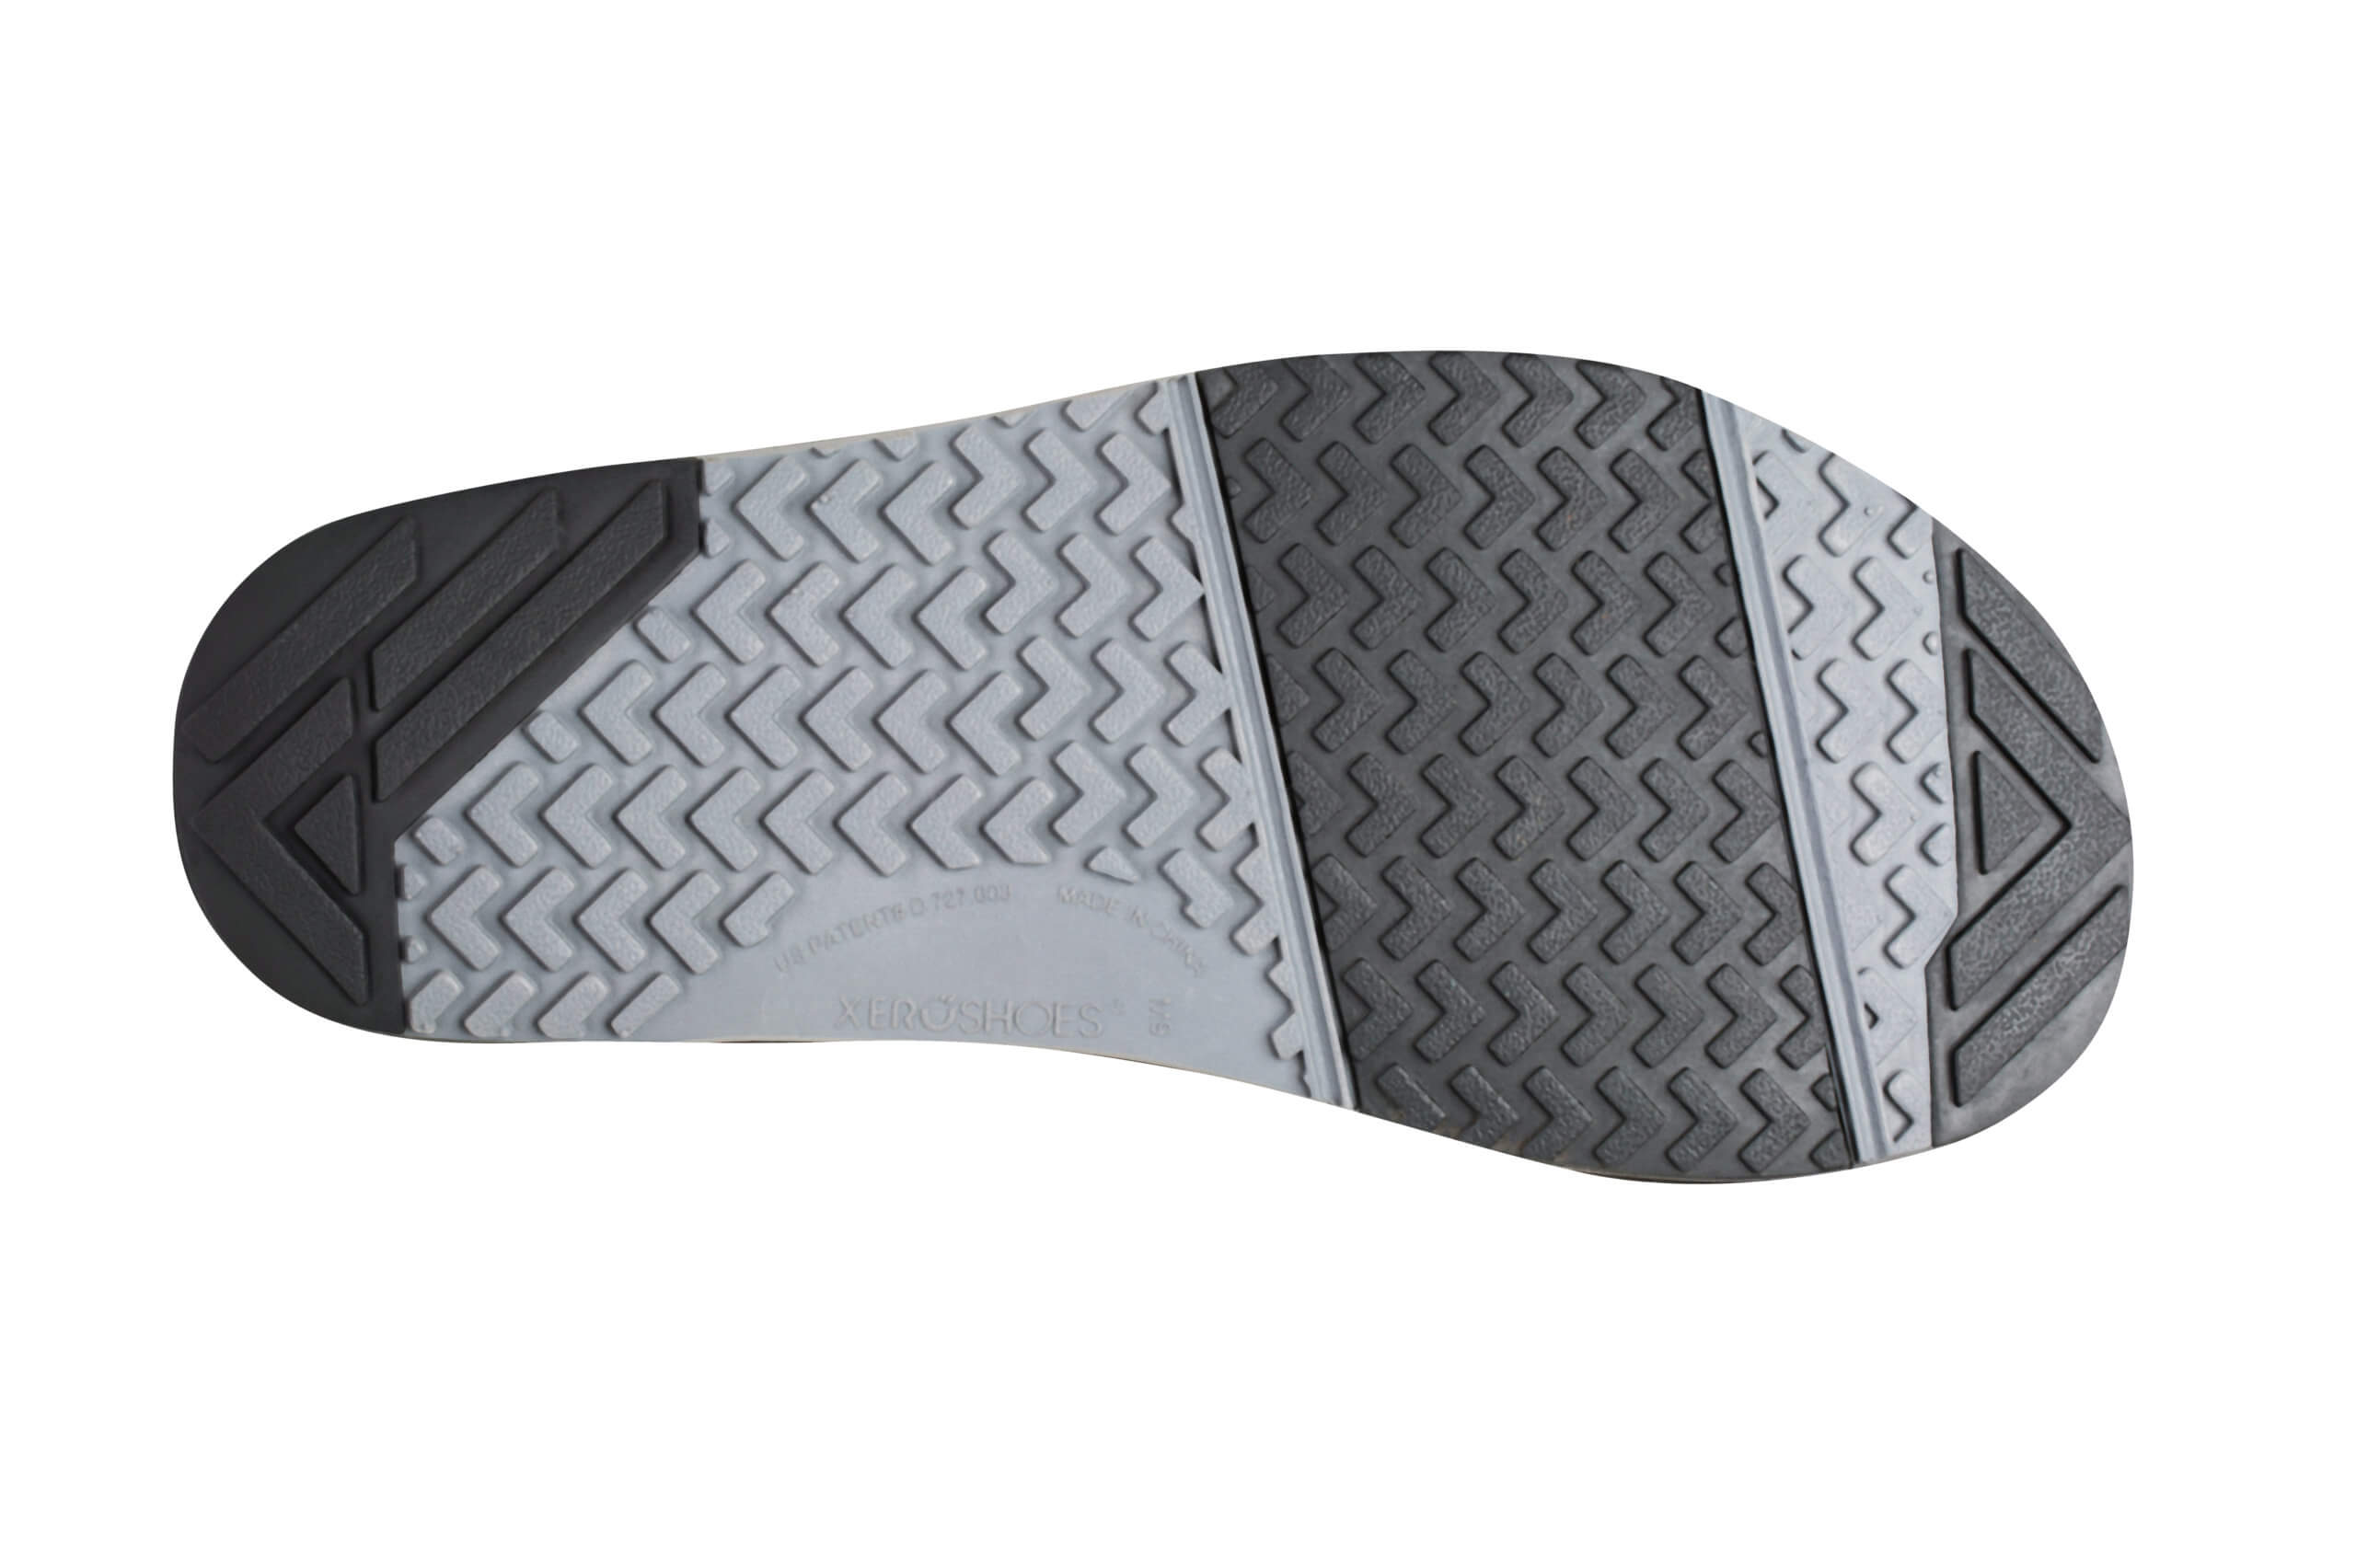 Foot Stimulating Naboso Trail Sport Sandal from Xero Shoes